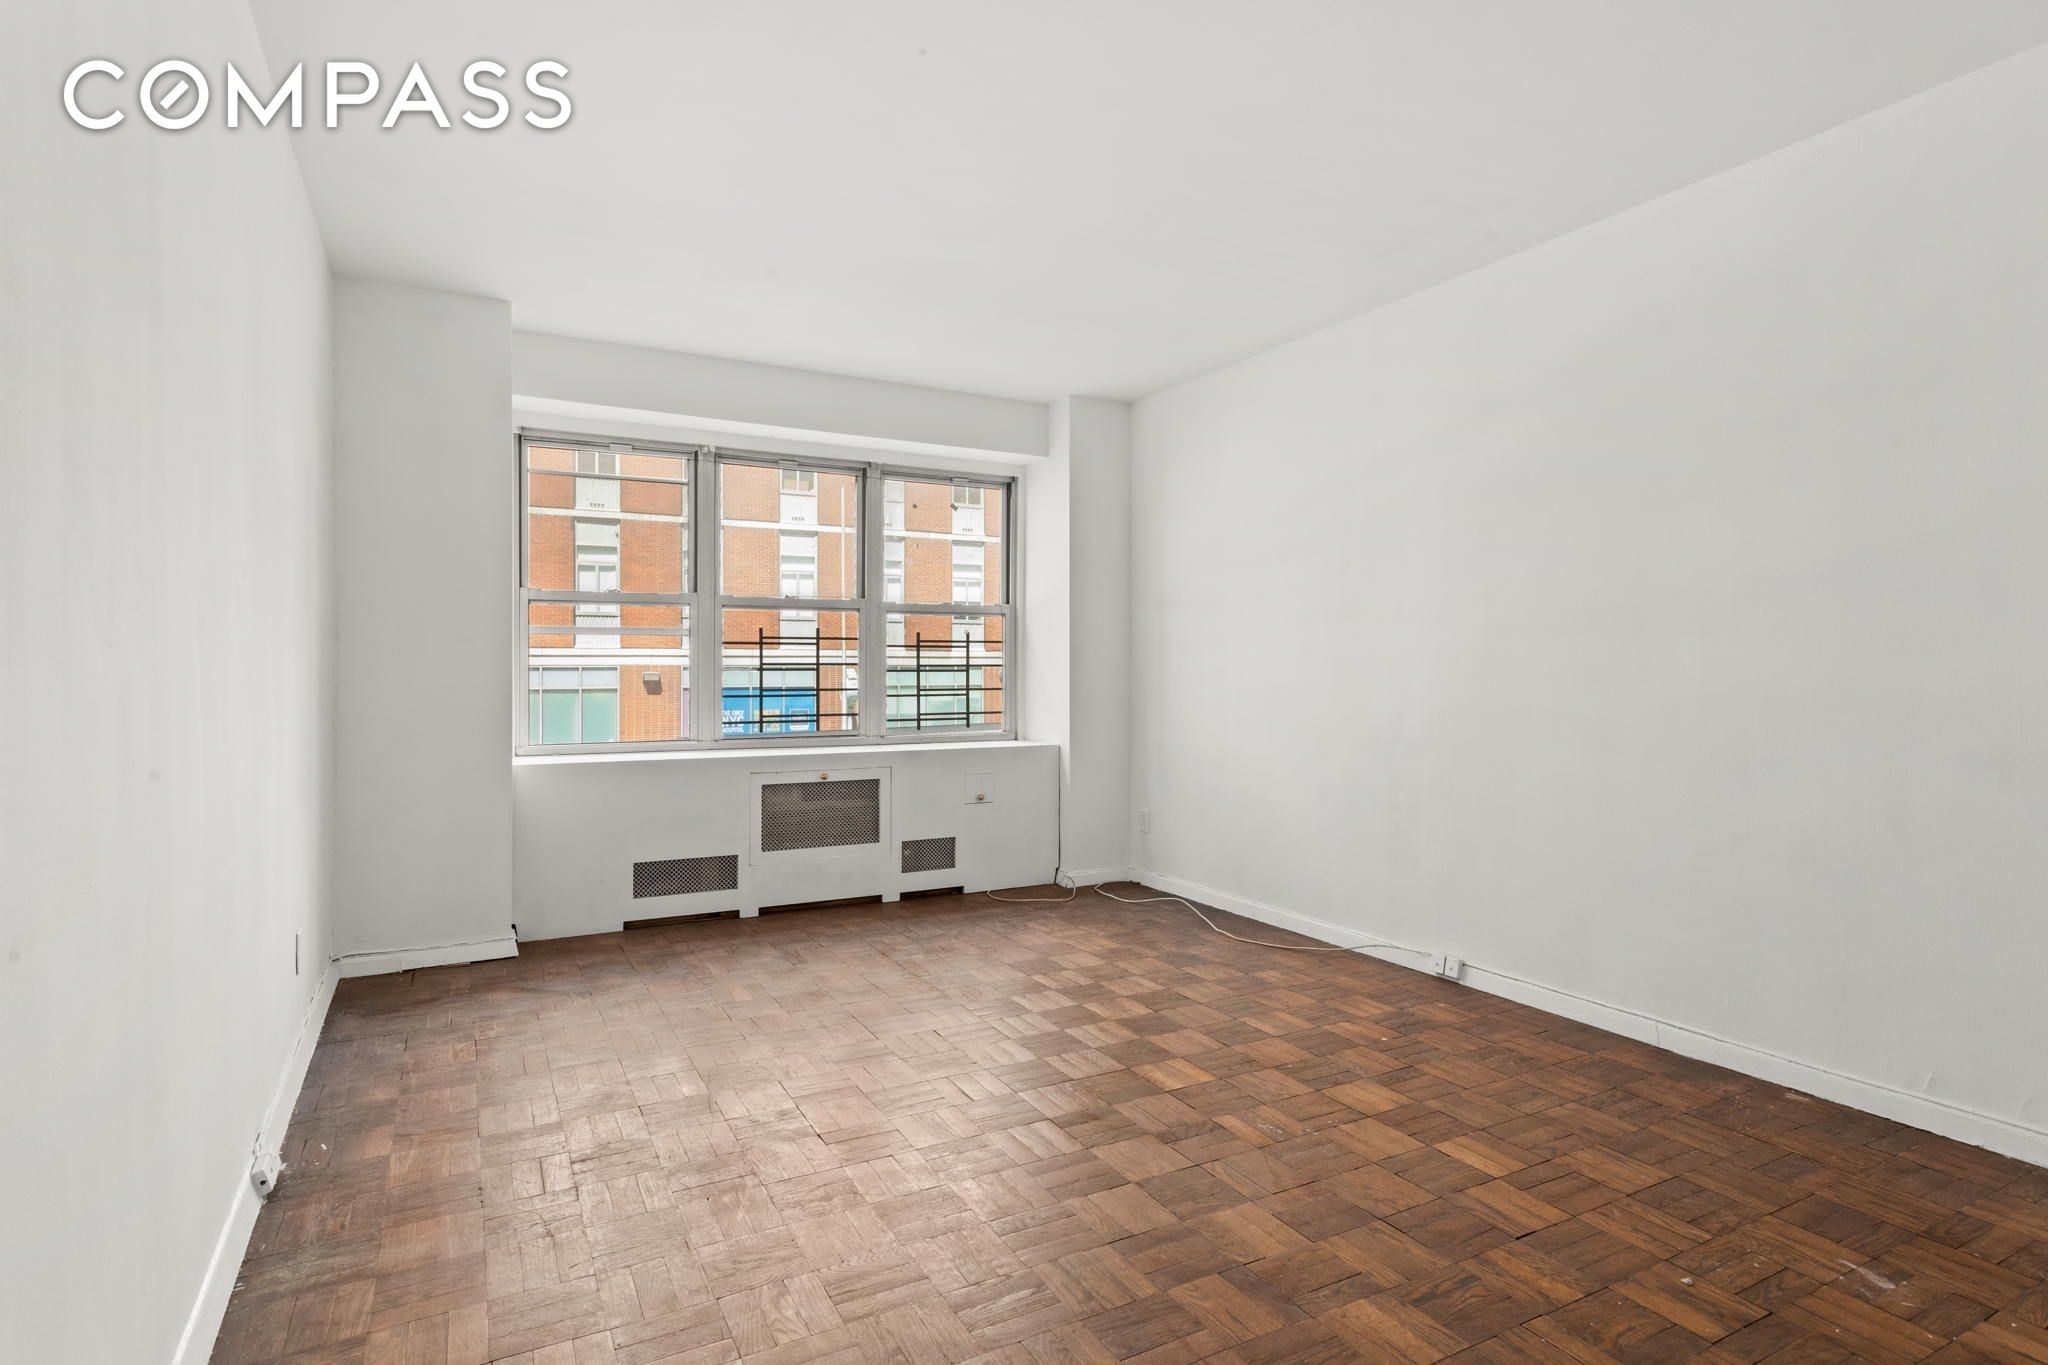 6. Co-op Properties for Sale at 150 E 77TH ST, 2A Lenox Hill, New York, New York 10075